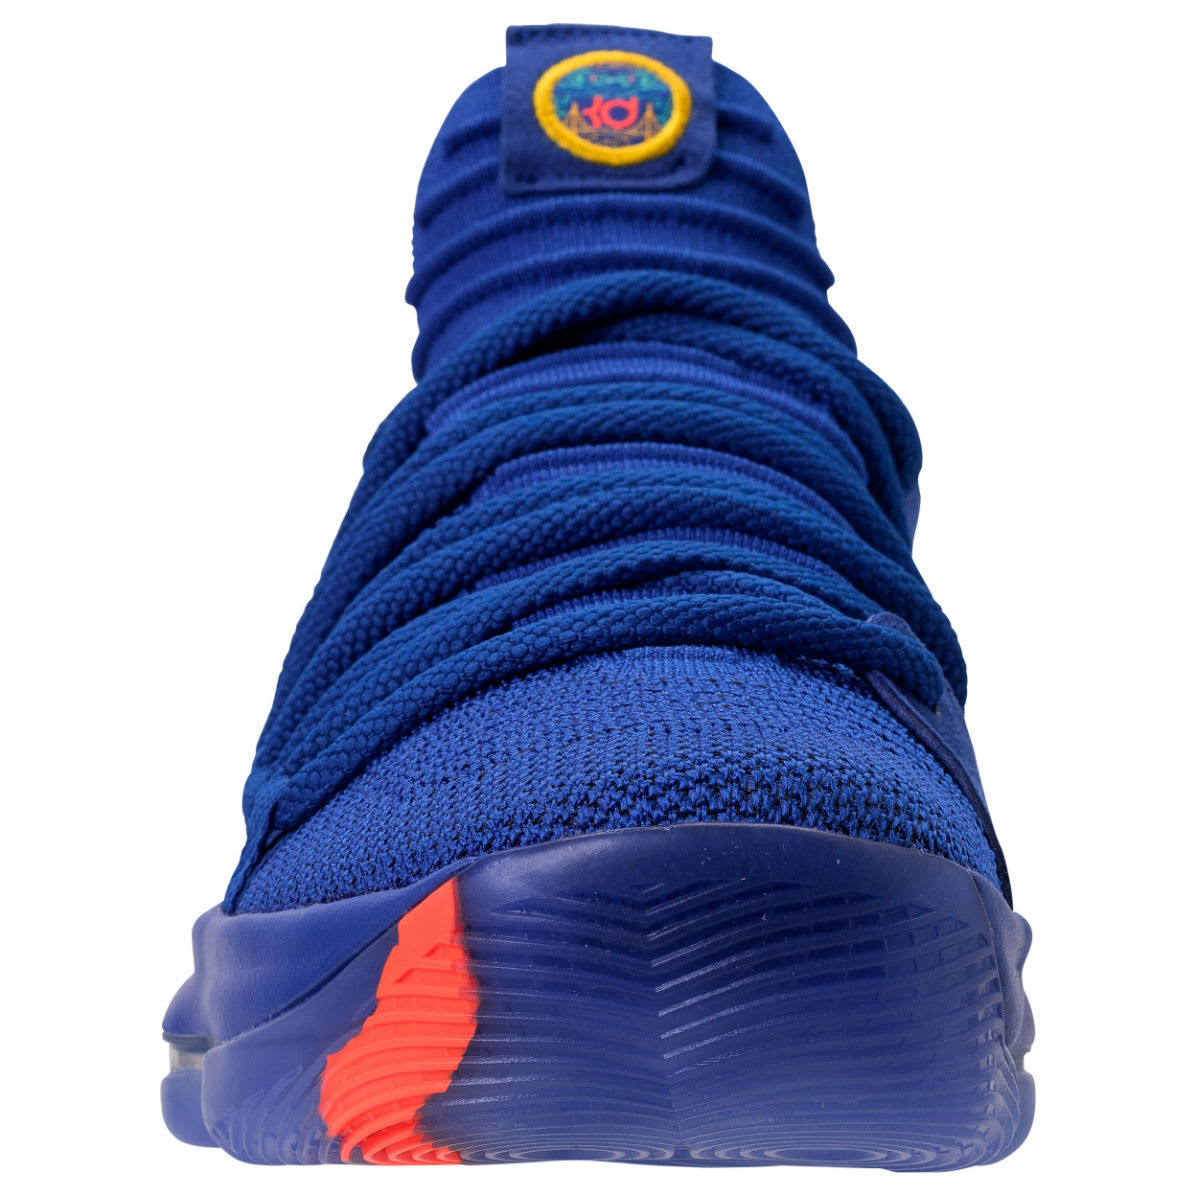 Nike KD 10 City Edition Release Date 897815-402 Front